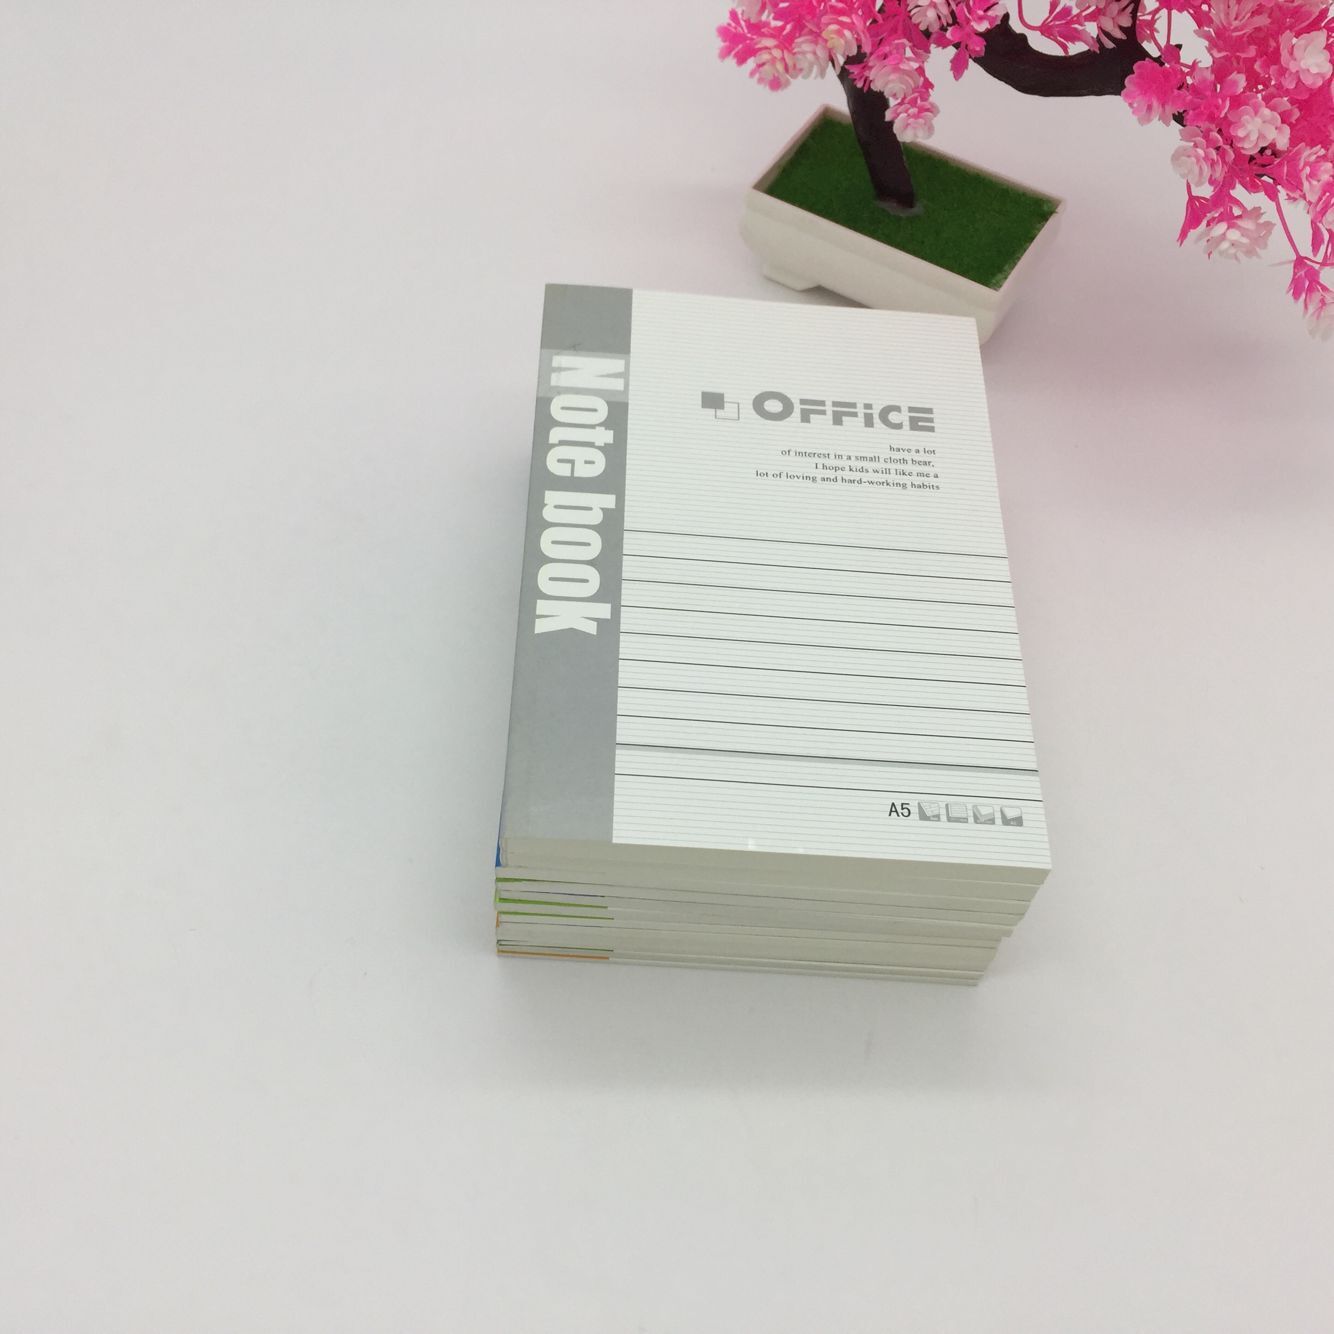 Soft Transcript notebook 32k to work in an office Notepad 19 Zhang Zhi 80 Notepad wireless Soft surface copy